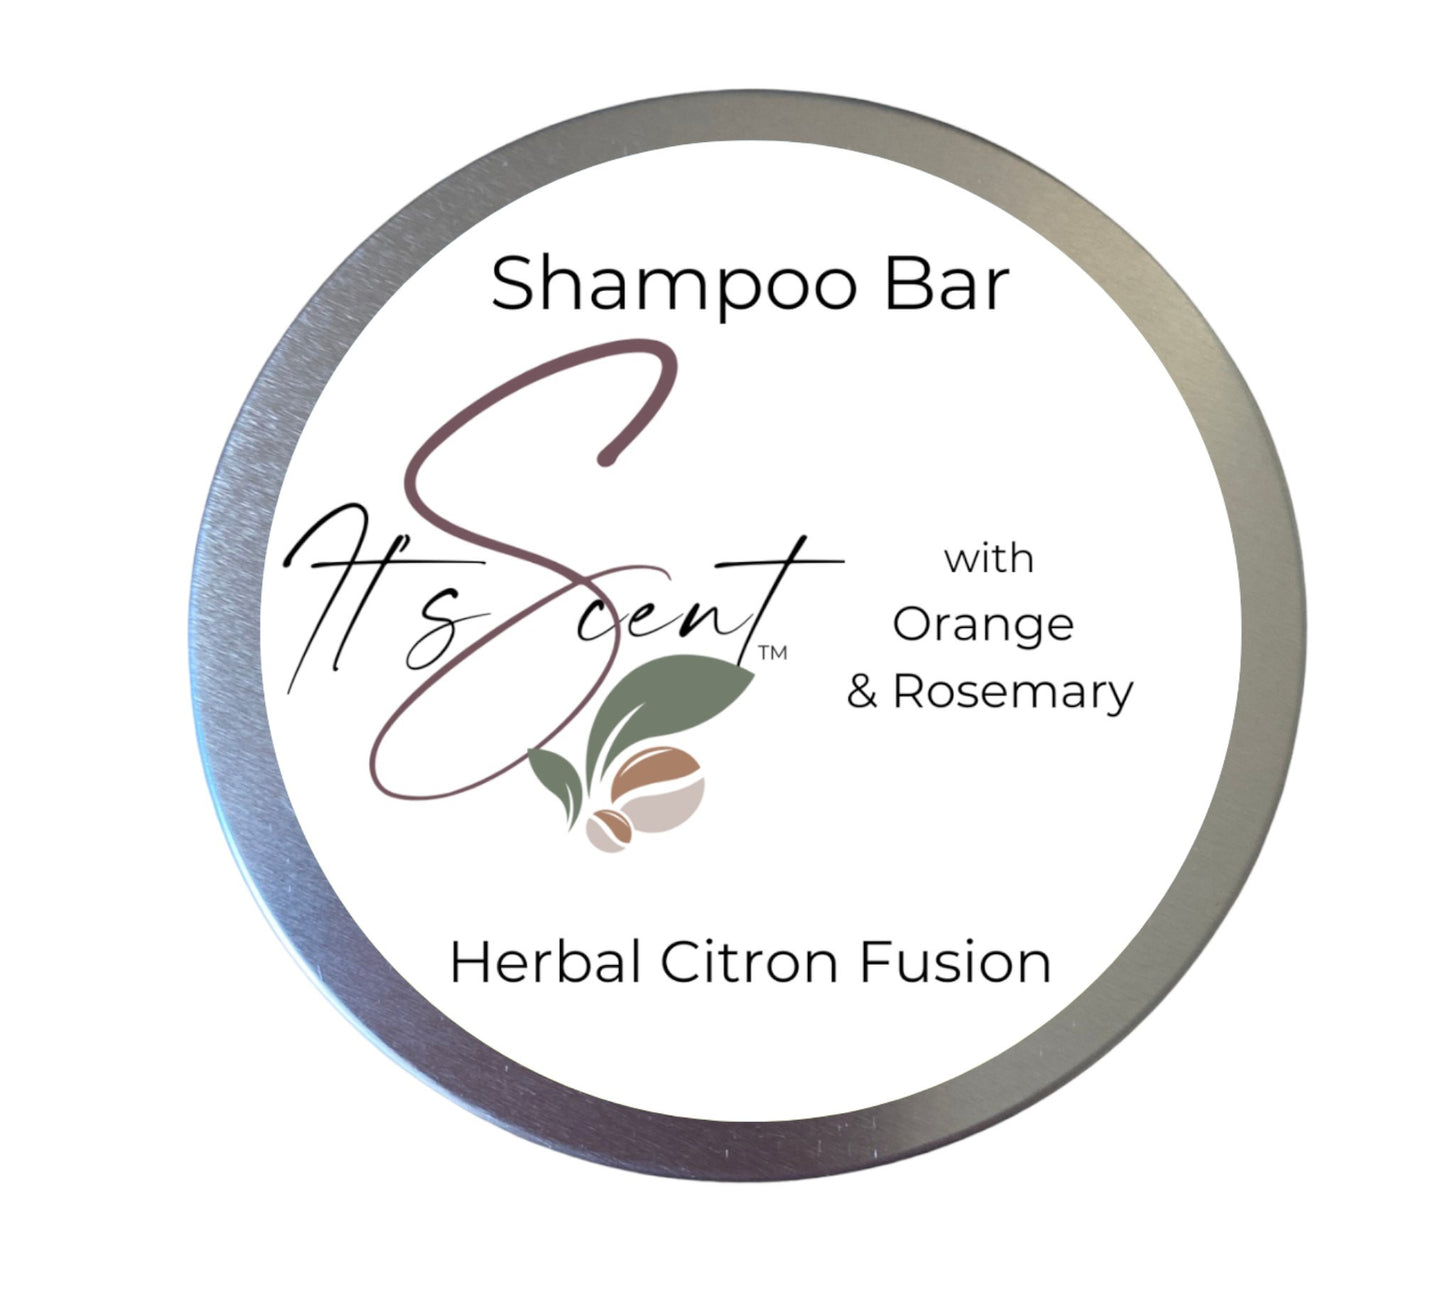 Herbal Citron Fusion Shampoo Bar. Suitable for Normal/Dry Hair